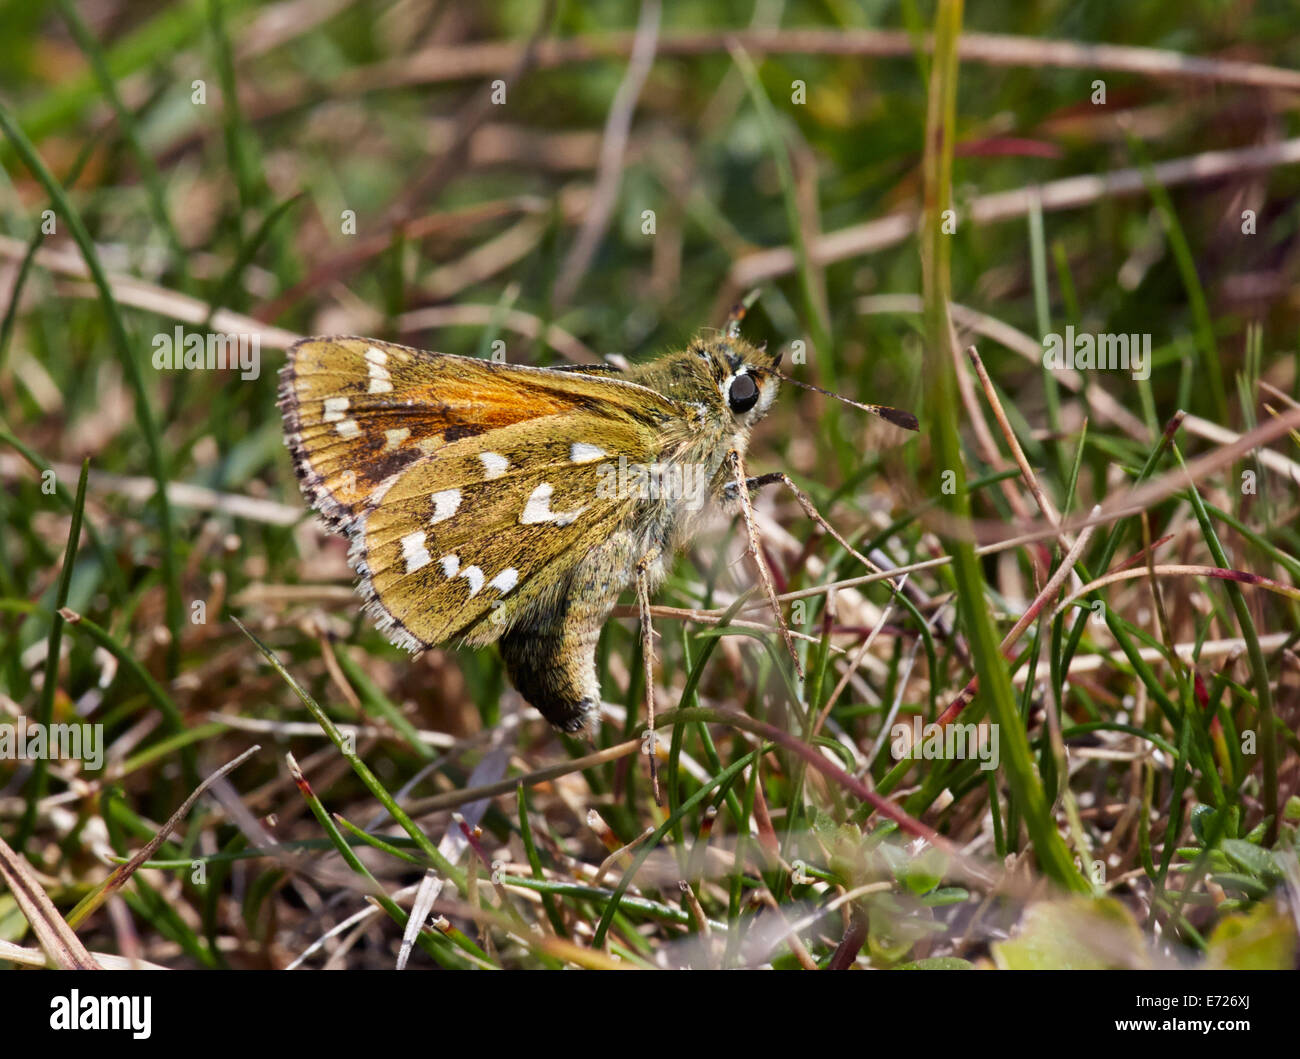 Silver-spotted Skipper egg laying on Sheep's Fescue grass. Denbies Hillside, Ranmore Common, Surrey, England. Stock Photo